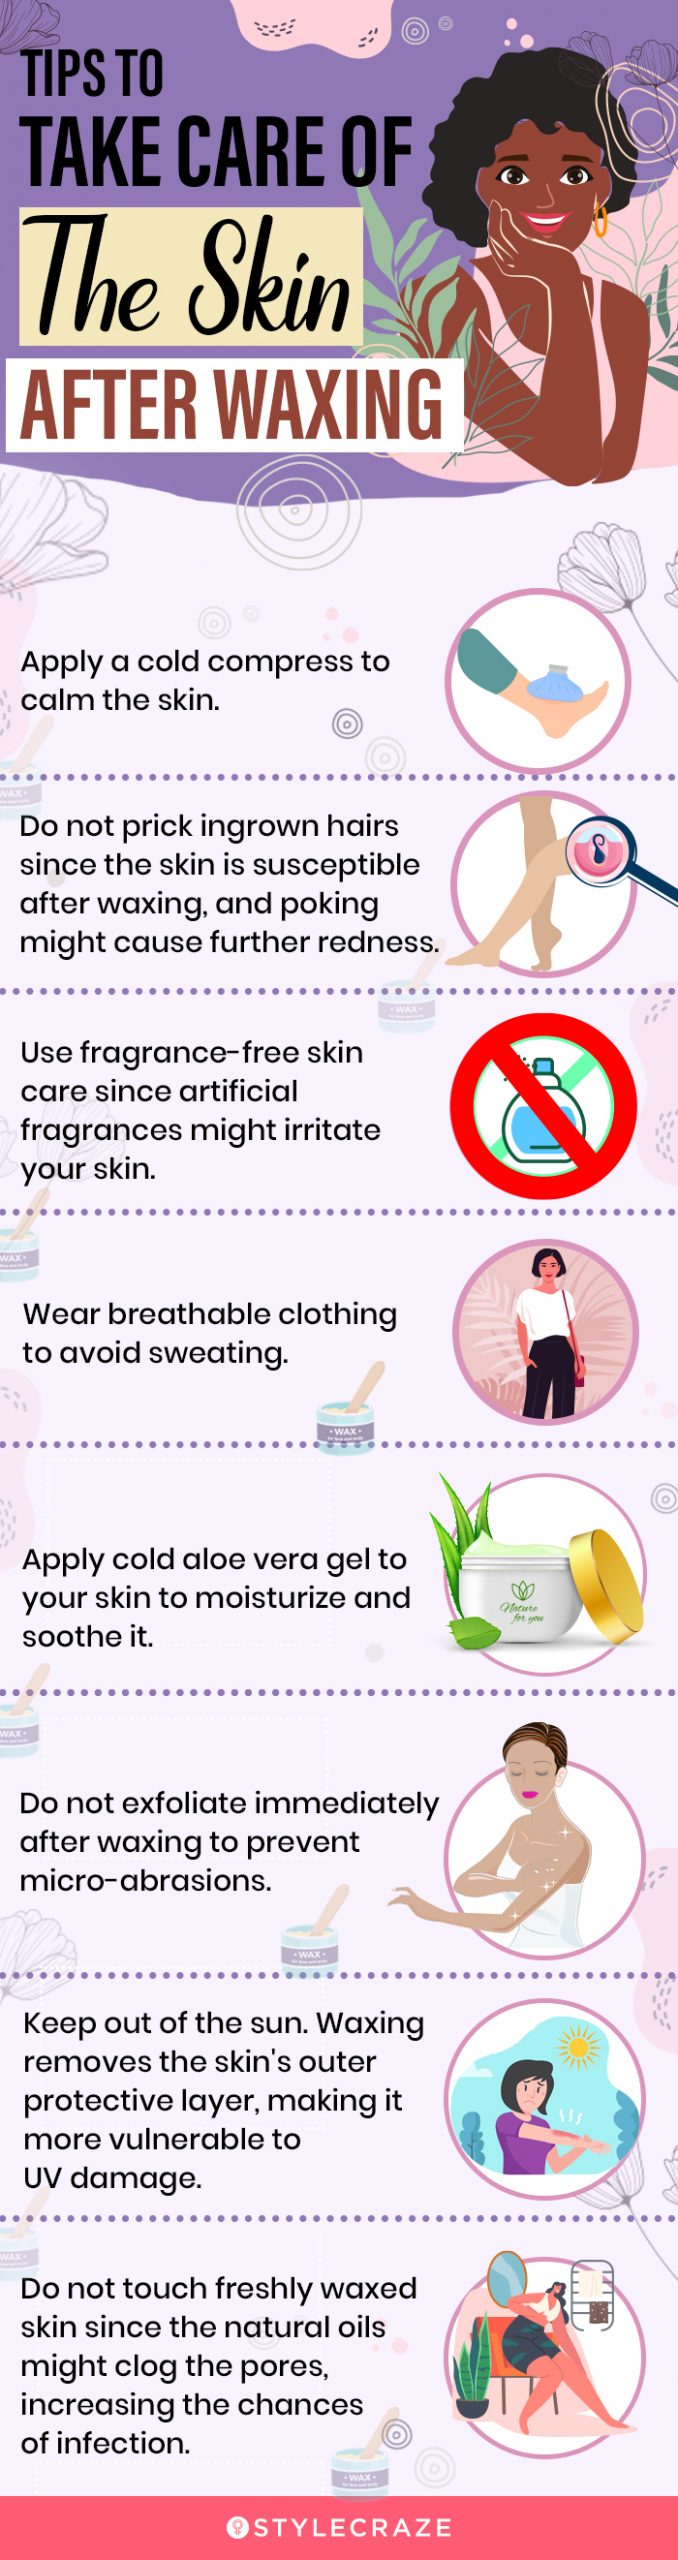 Tips To Take Care Of The Skin After Waxing [infographic]